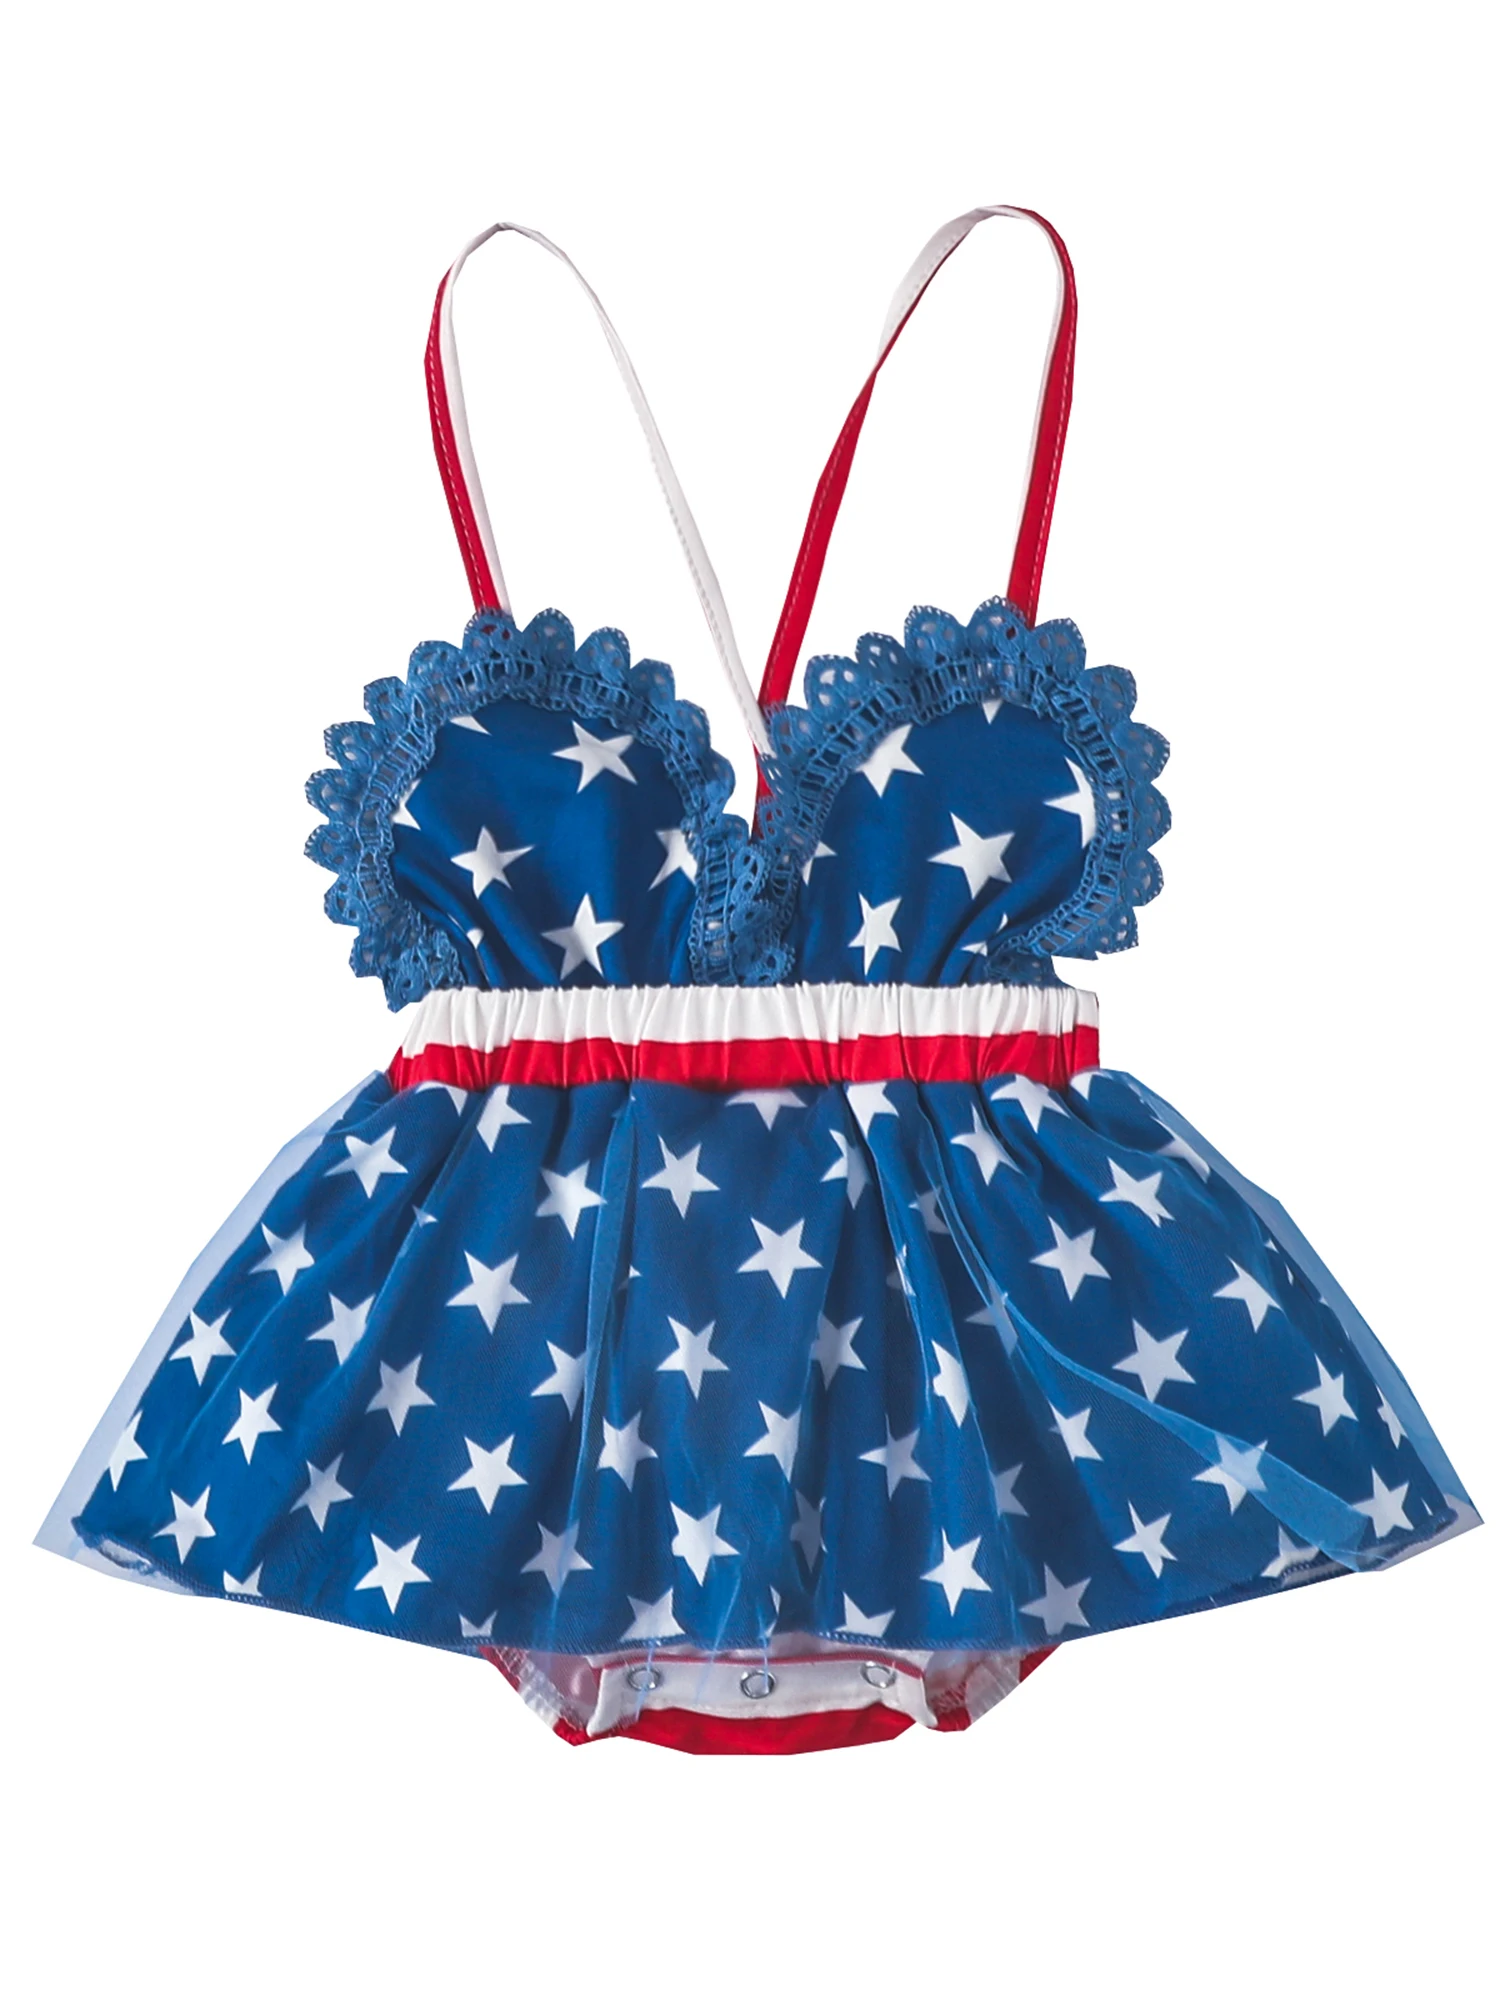 

0-24M Baby Girls 4th of July Dress Sleeveless Strap Tulle Romper Dress USA Flag Tutu Sundress Independence Day Clothes